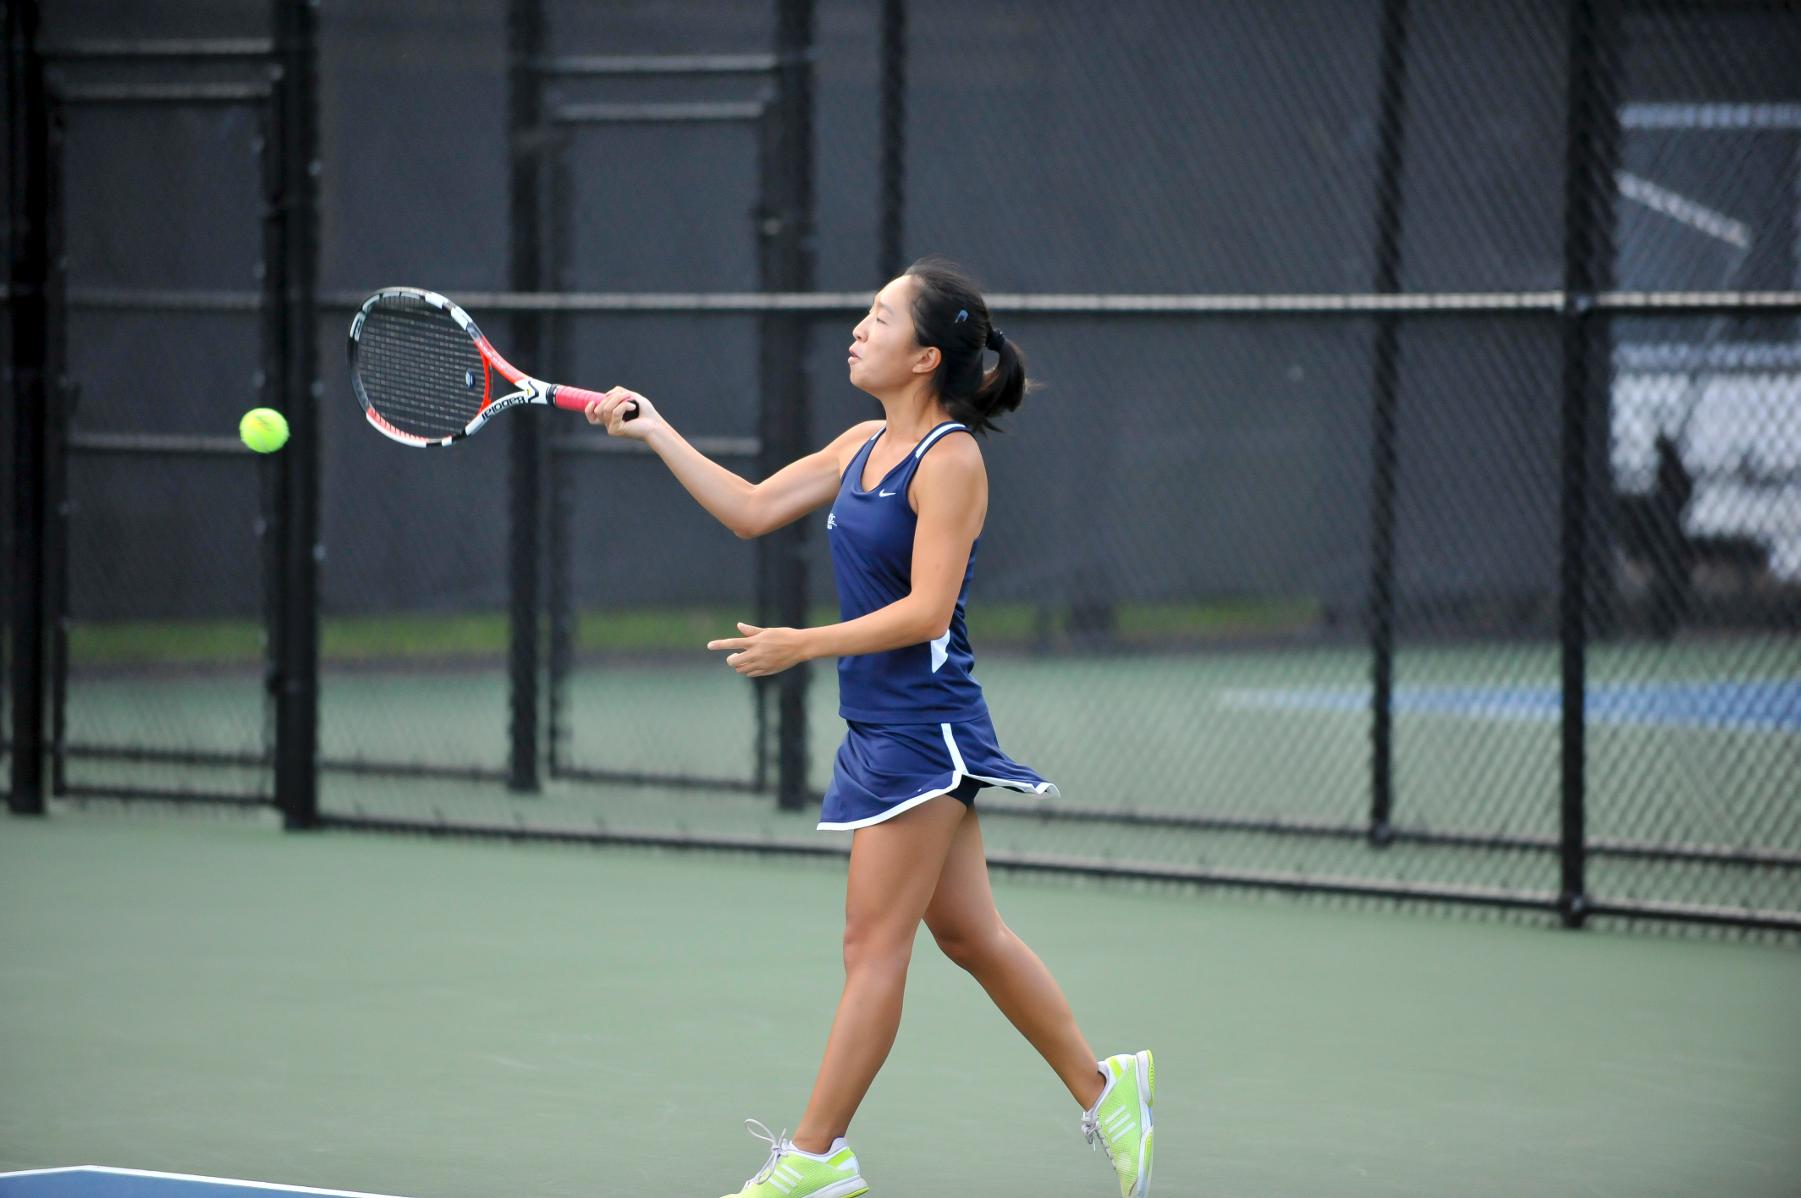 TENNIS POSTS 9-0 VICTORY OVER SIMMONS